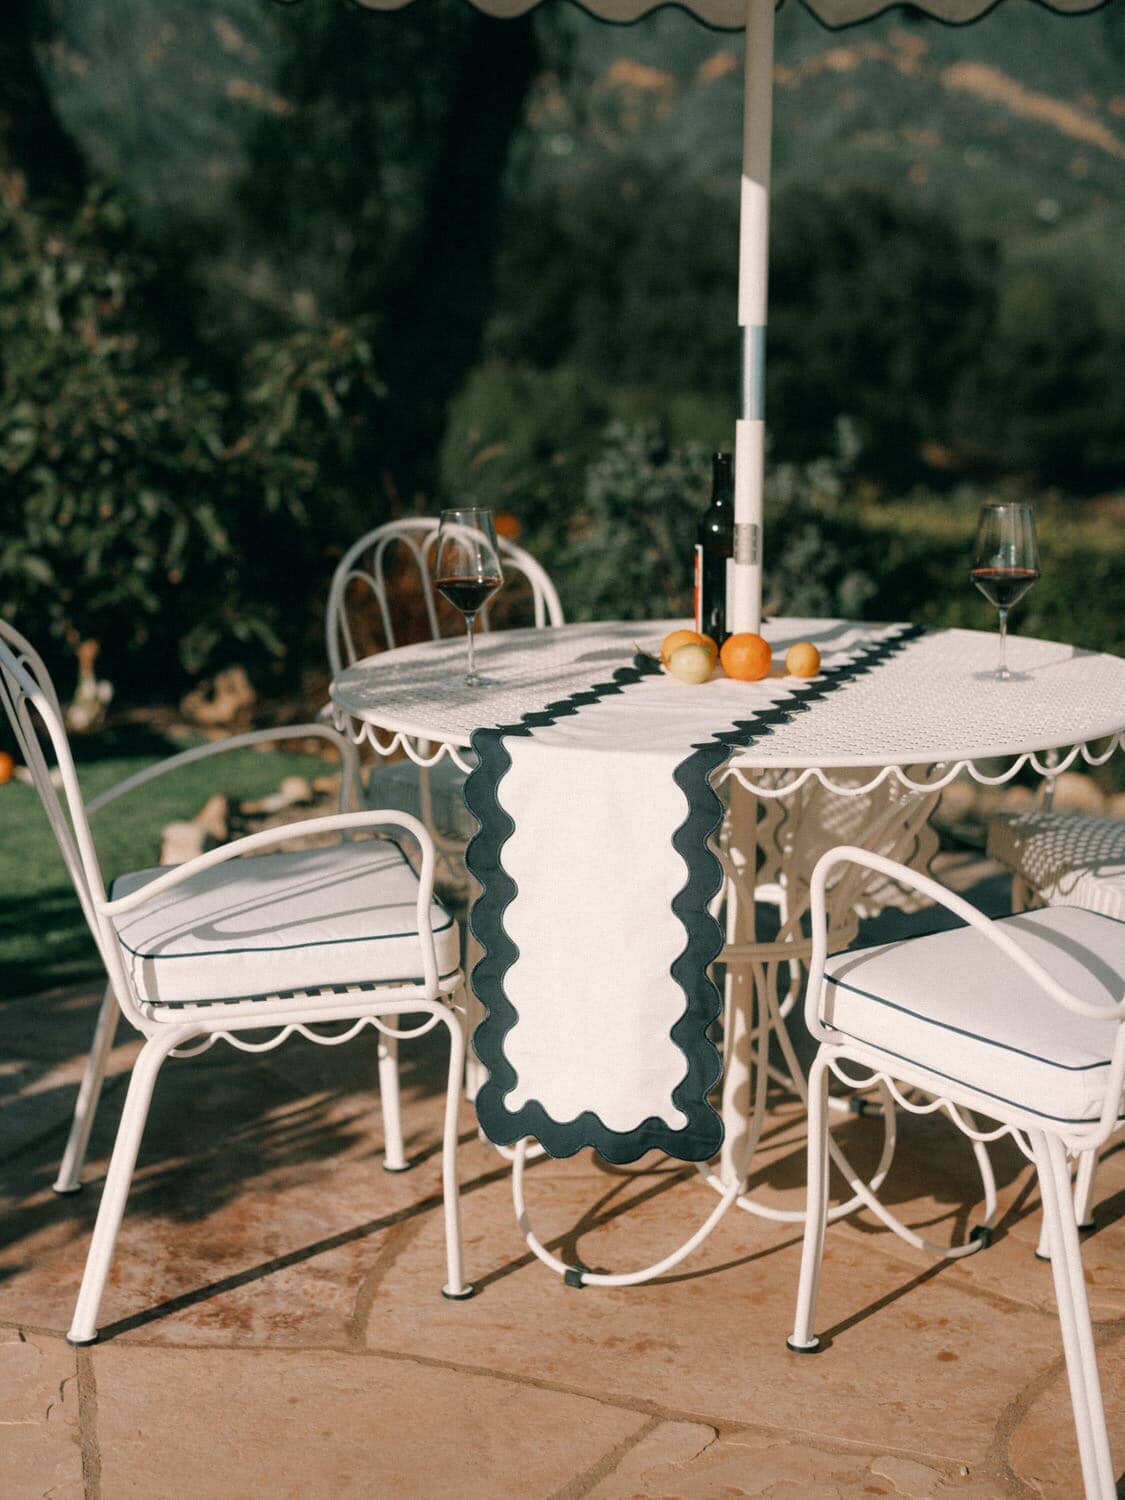 Al fresco dining table with chairs on a poolside patio